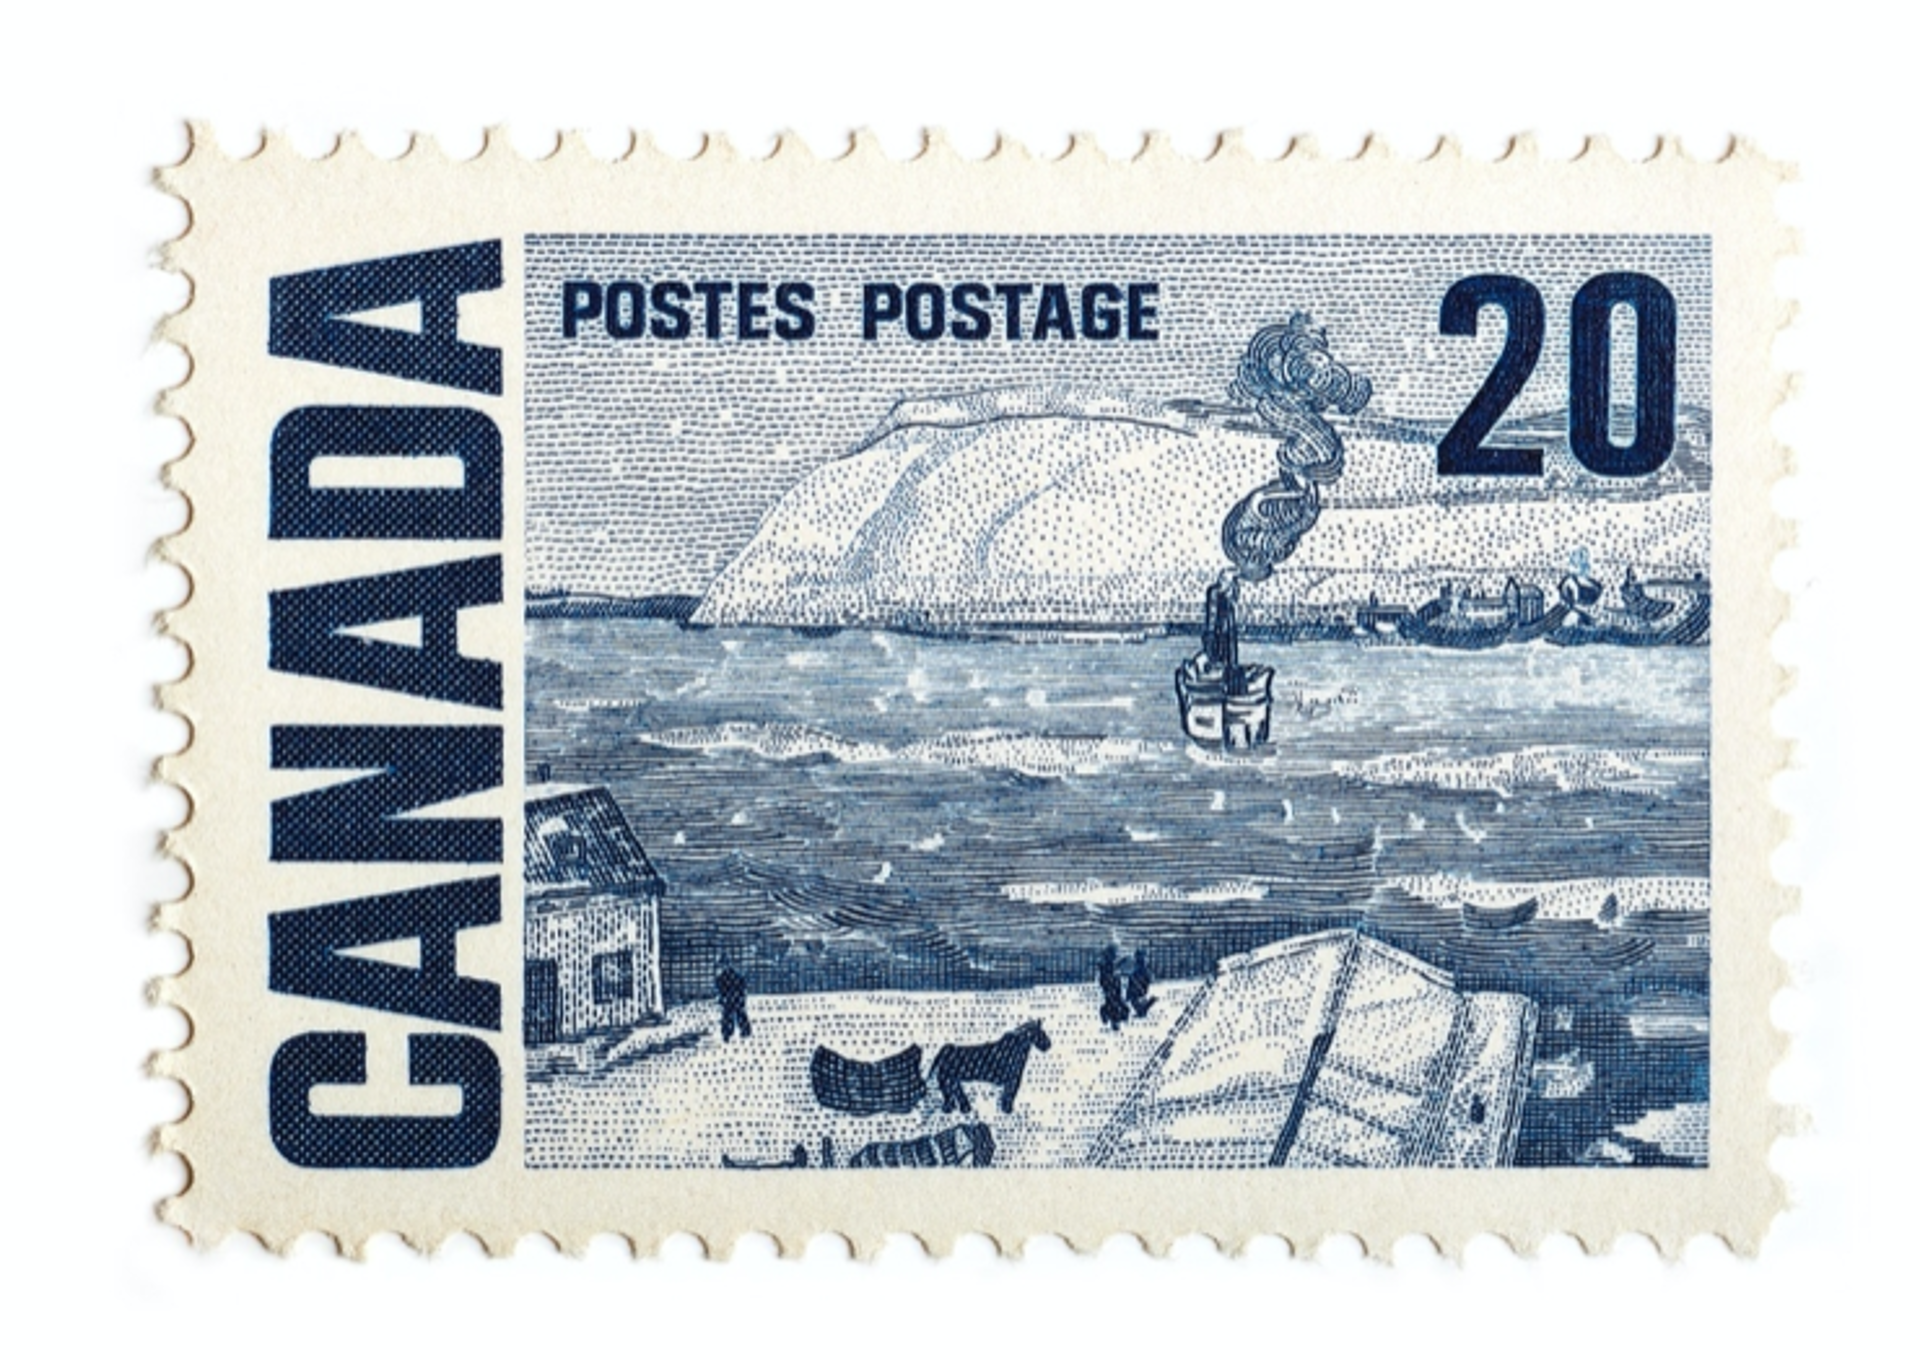 Canada Stamp 20 Cents by Peter Andrew Lusztyk | Collectibles